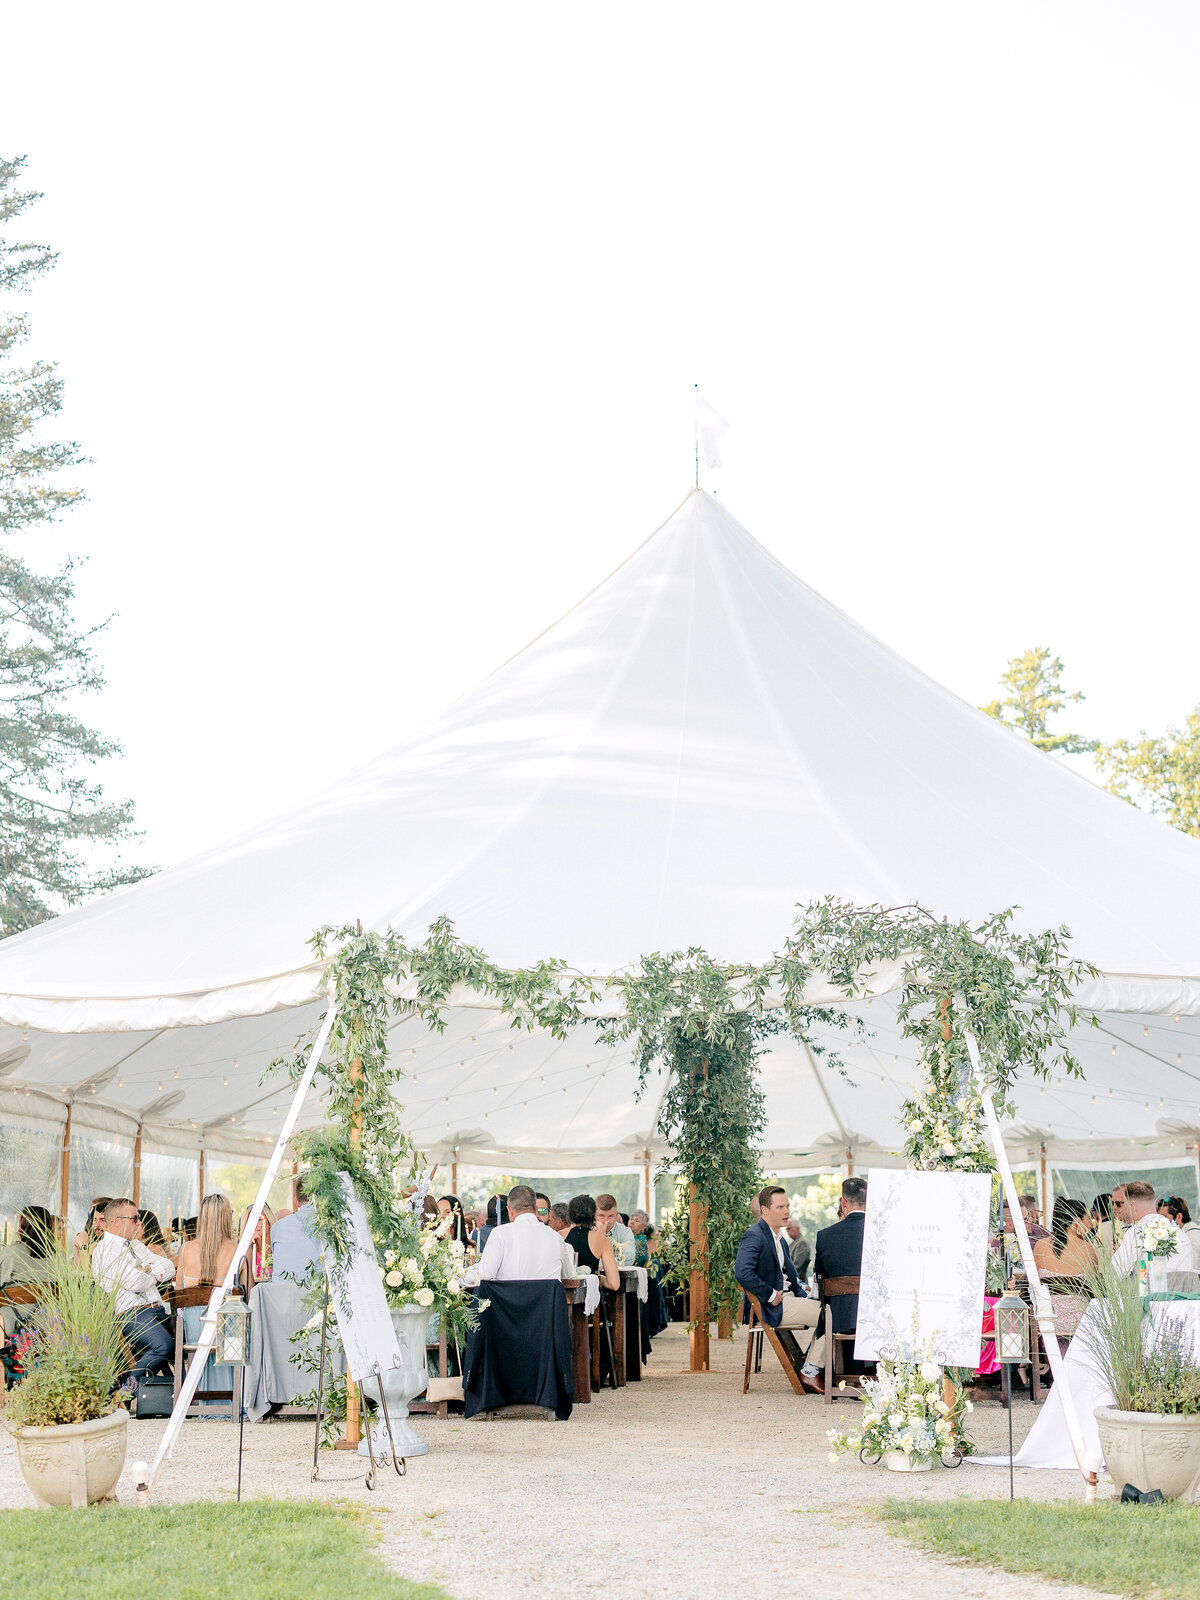 Outdoor shot of wedding reception tent with greenery draped on it and wedding guests at tables underneath